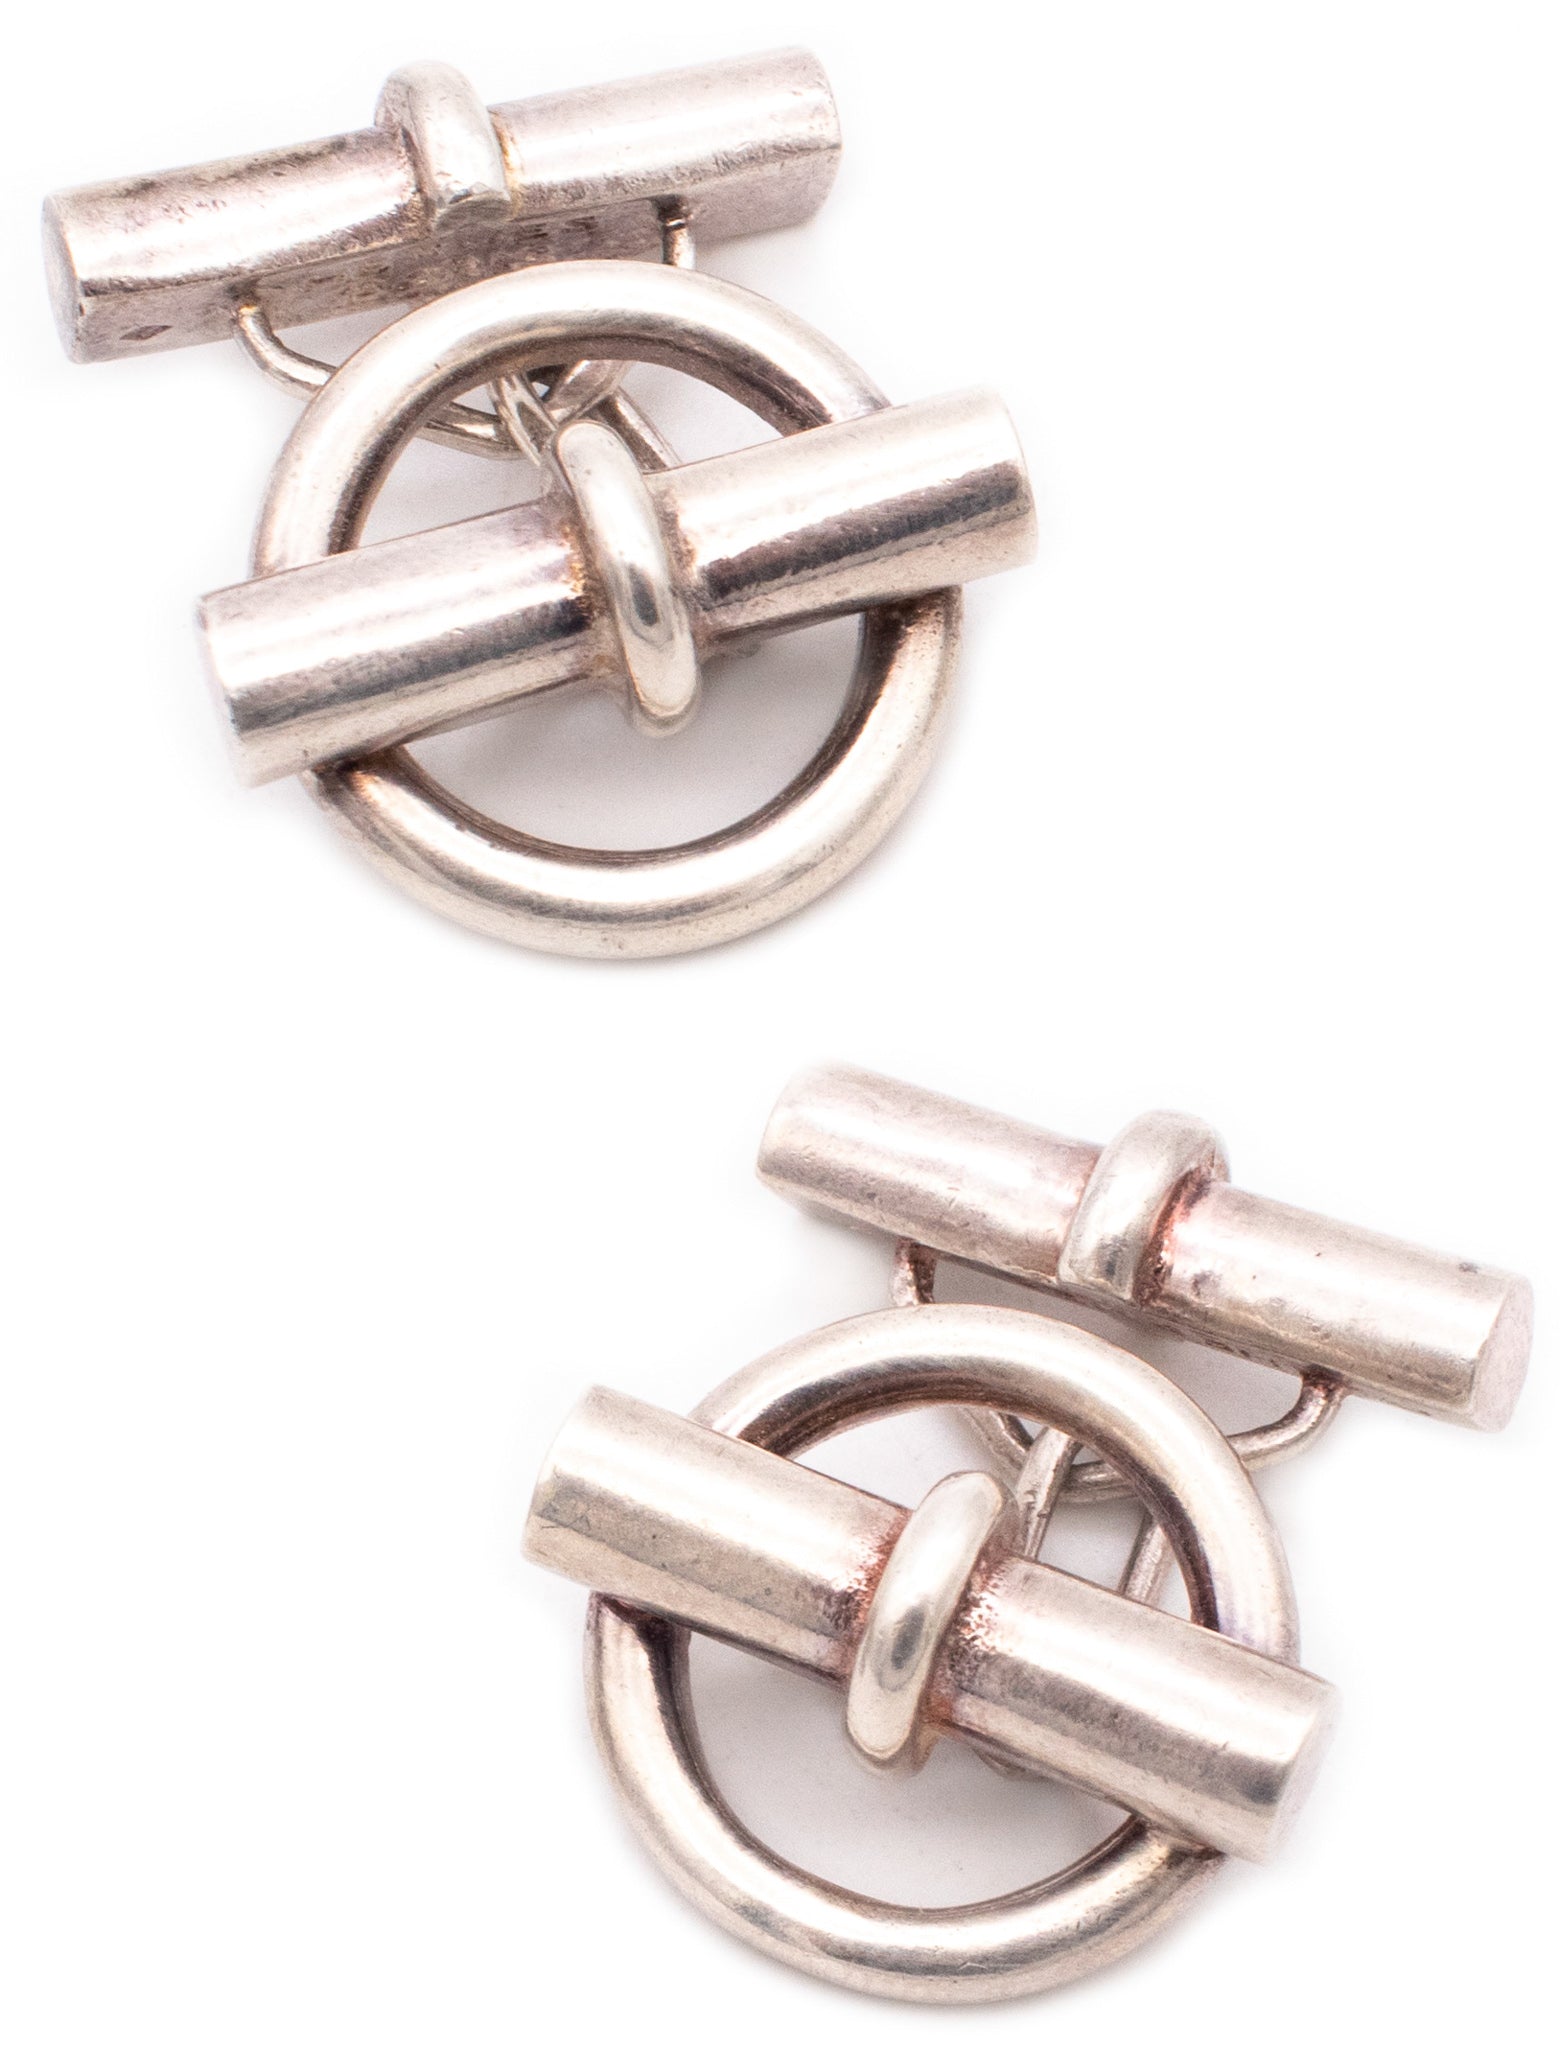 HERMES 1970 PARIS RARE CHAINE D'ANCRE CUFFLINKS IN STERLING SILVER WITH BOX